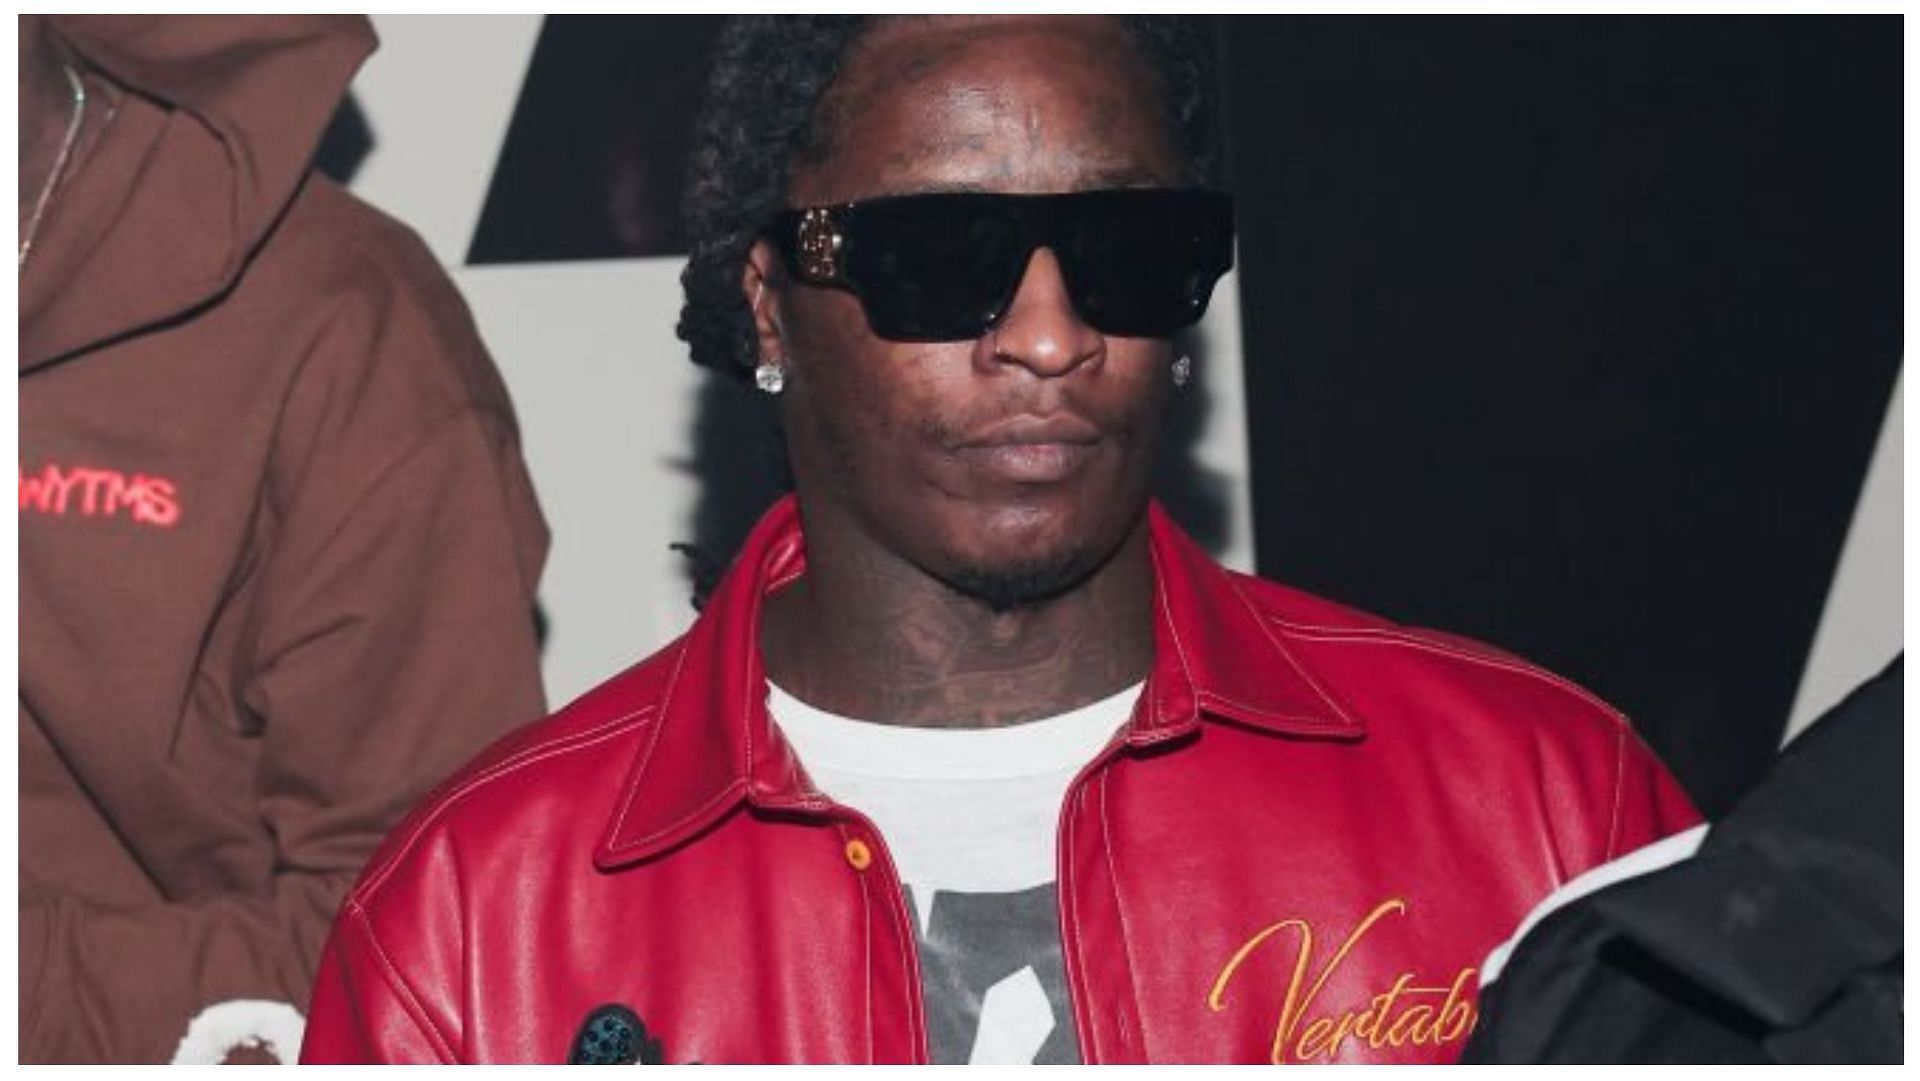 Young Thug is a famous rapper, singer and songwriter (Image via Prince Williams/Getty Images)